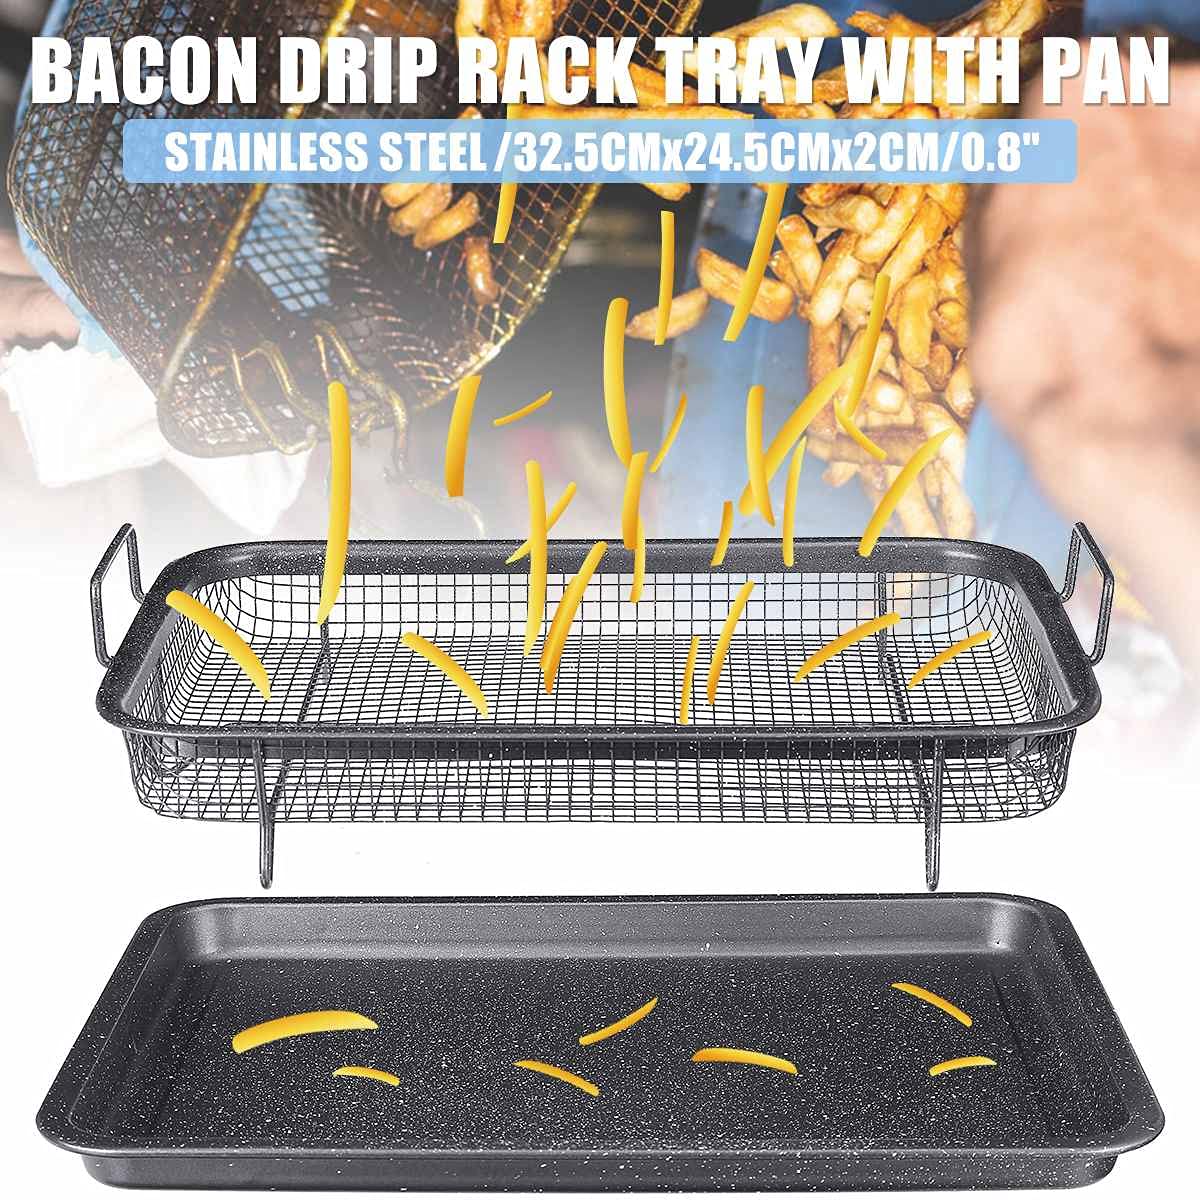 DODY Oven Crisper Tray, -Pieces Nonstick Oven Air Fryer Pan/Tray and Mesh Basket Set - Ideal for French Fry - Frozen Food, Baking Sheet without Oil